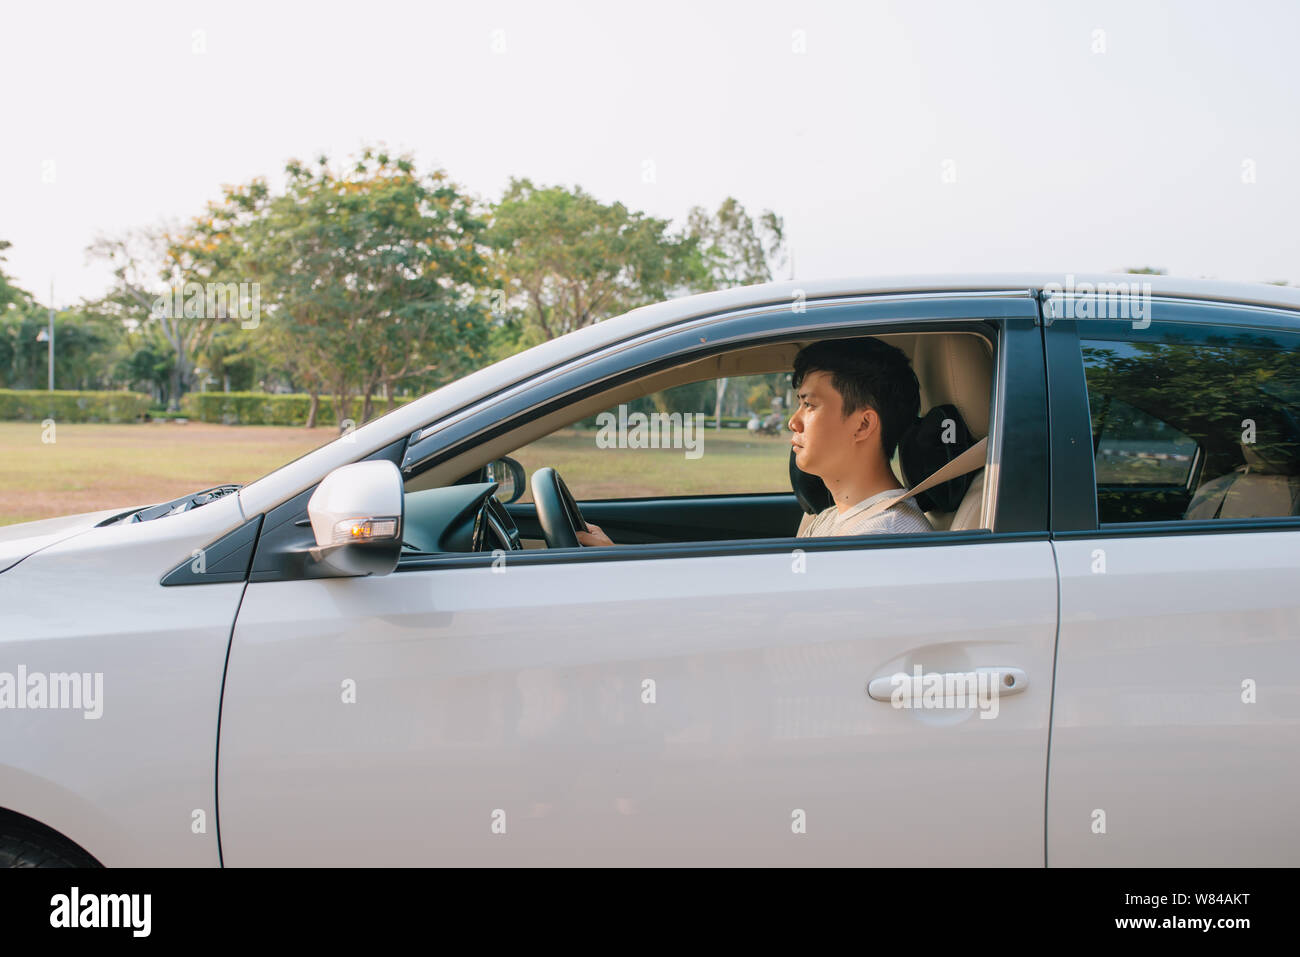 Riding his new car. Side view of handsome young man driving his car and smiling Stock Photo